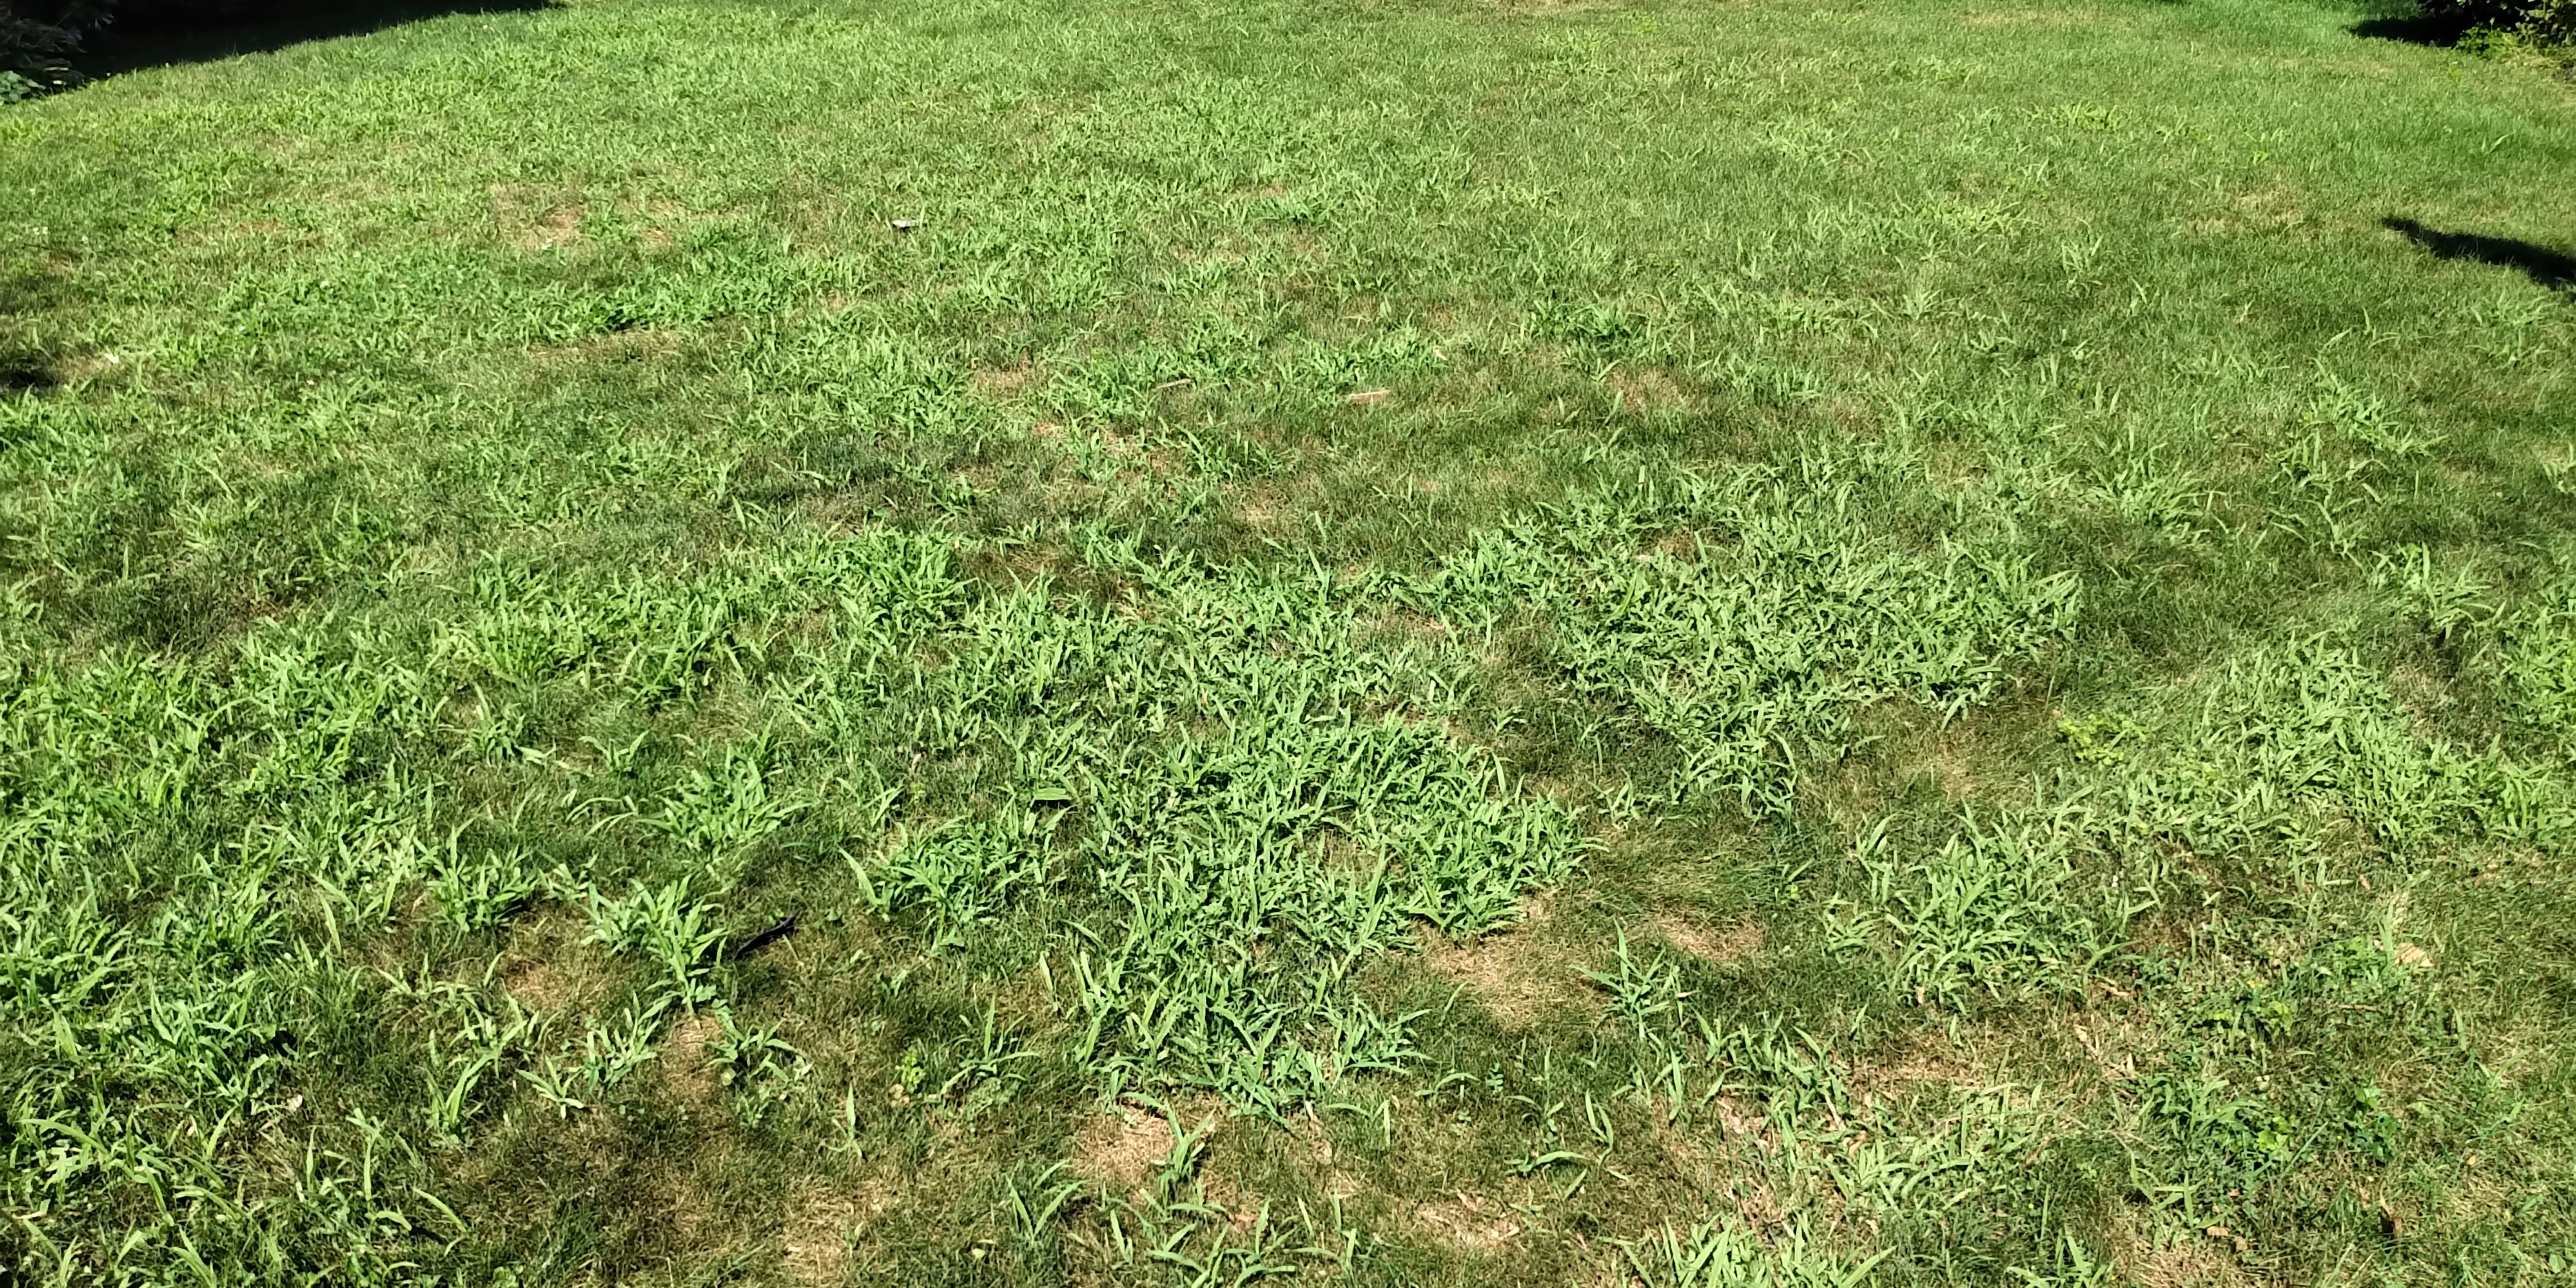 Crabgrass is an annual plant, which means it dies each year in the fall.